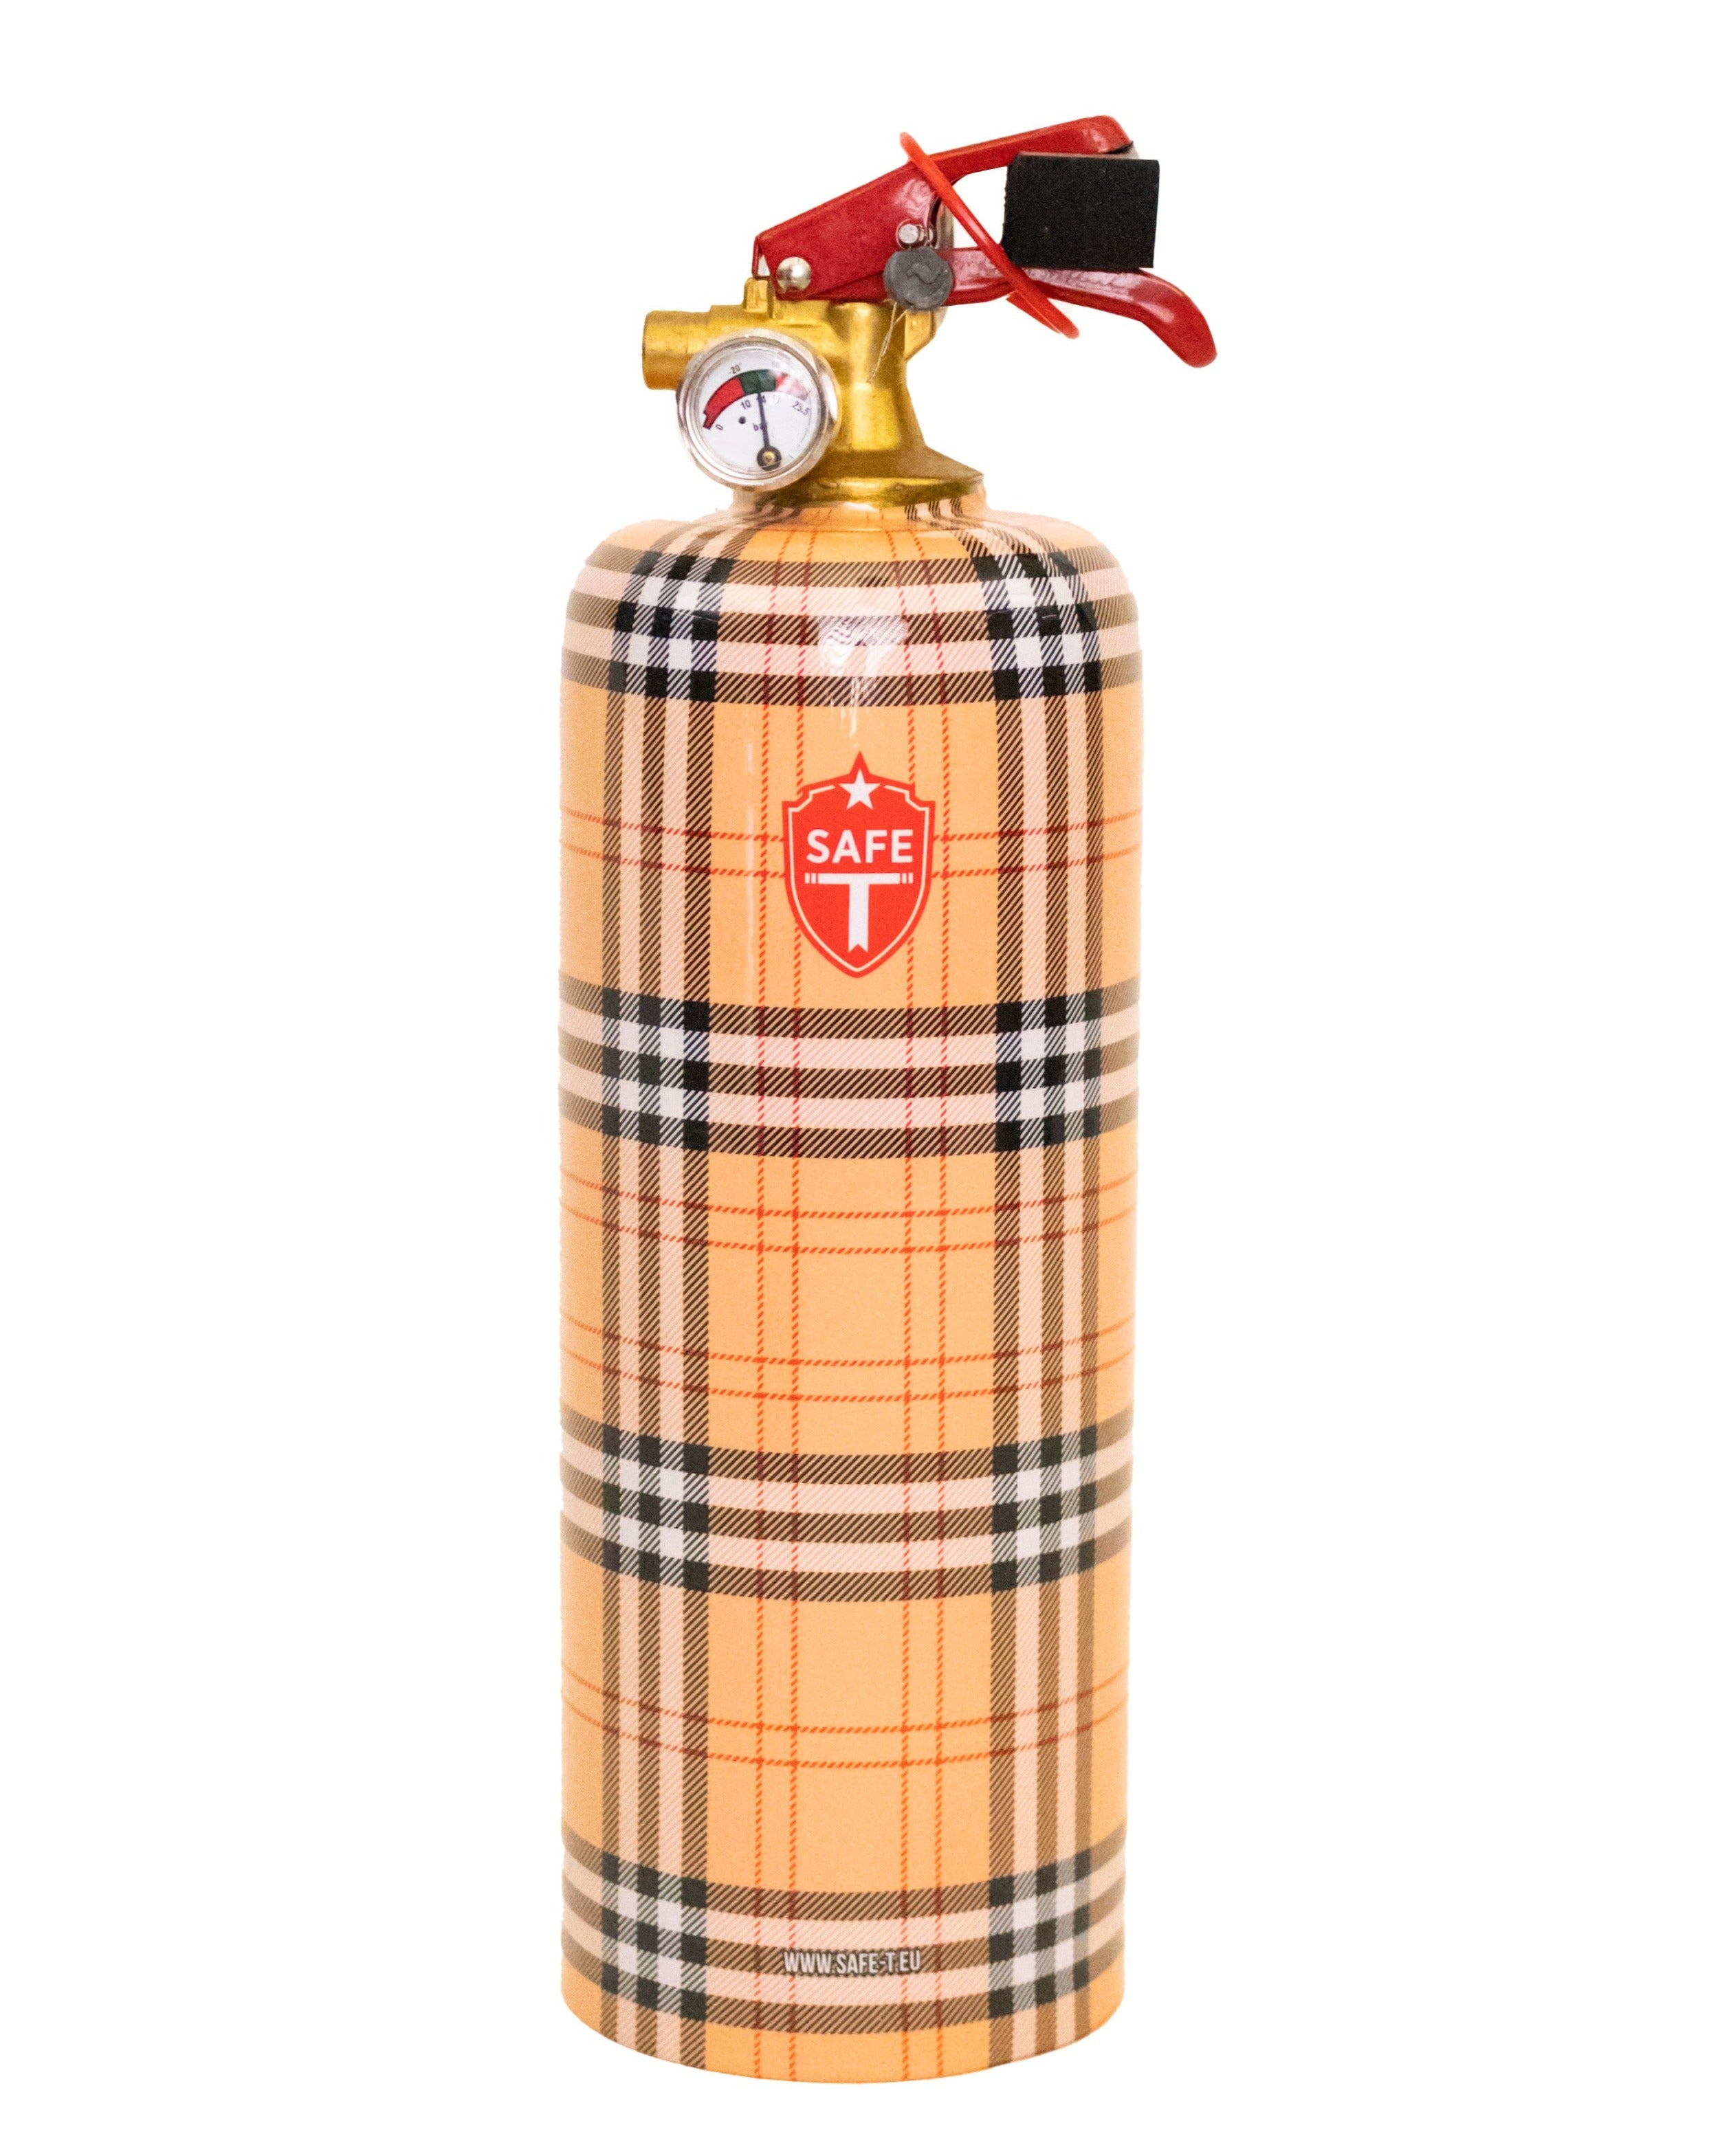 T-Safe Checkered Fire Extinguisher